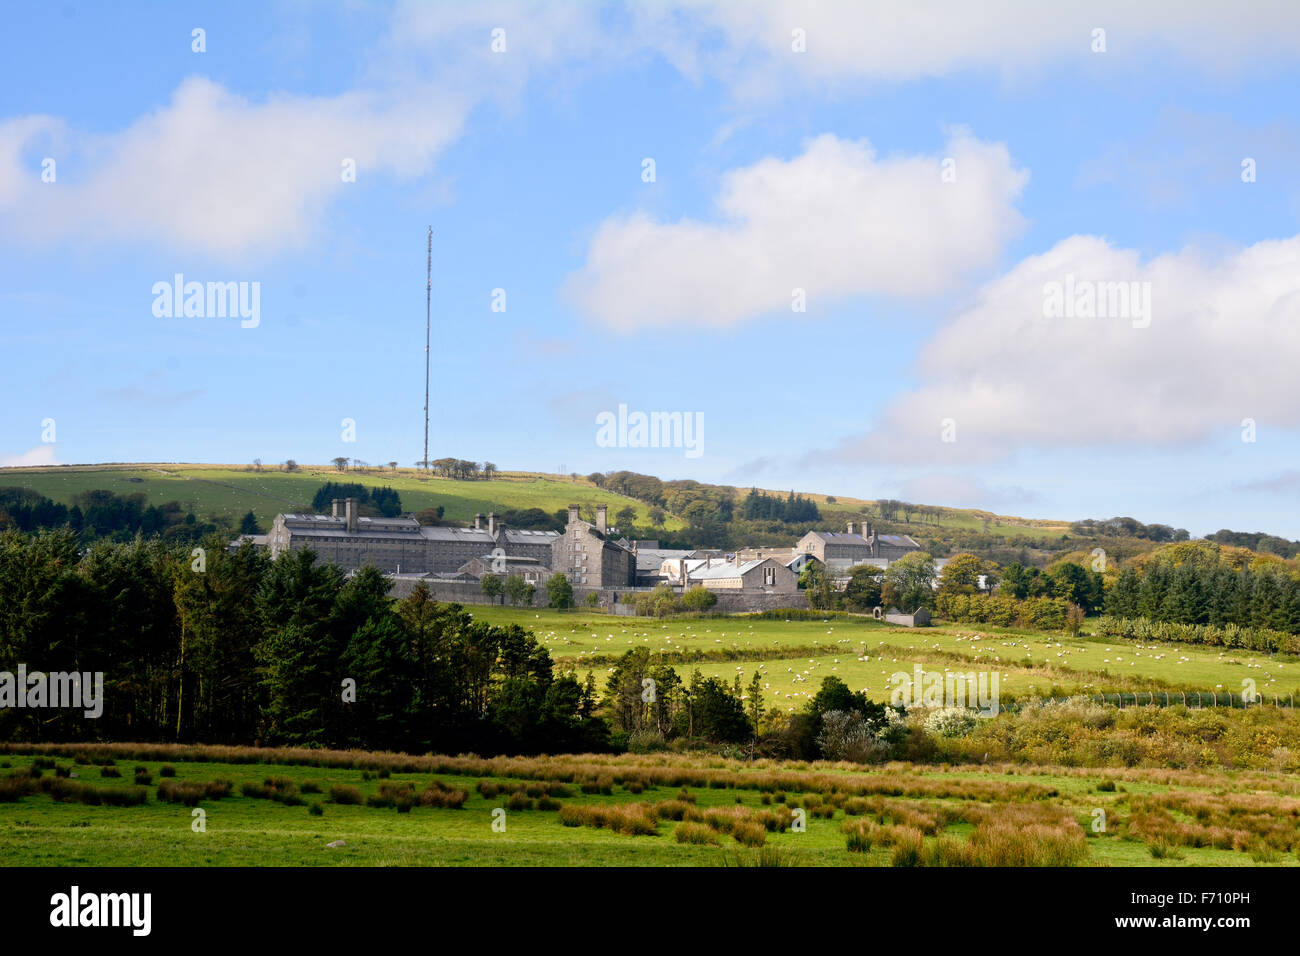 Her Majesty's Prison (HMP) Dartmoor located in Princetown the most remote prison in the British Isles. Stock Photo